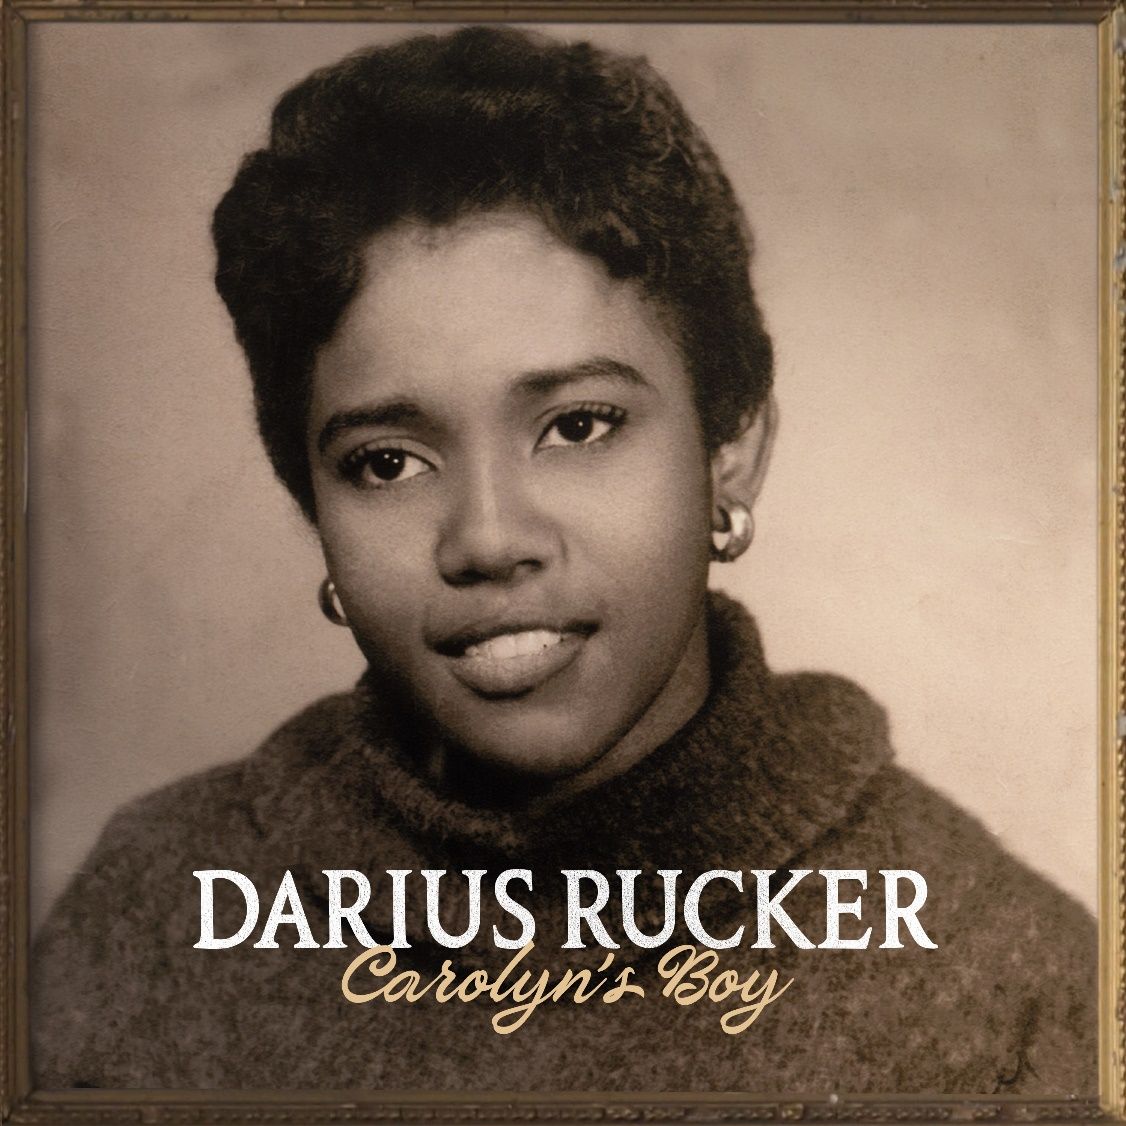 DARIUS RUCKER BRINGS “SOUTHERN COMFORT” TO FANS AHEAD OF HIGHLY ANTICIPATED NEW ALBUM CAROLYN’S BOY OUT OCT. 6